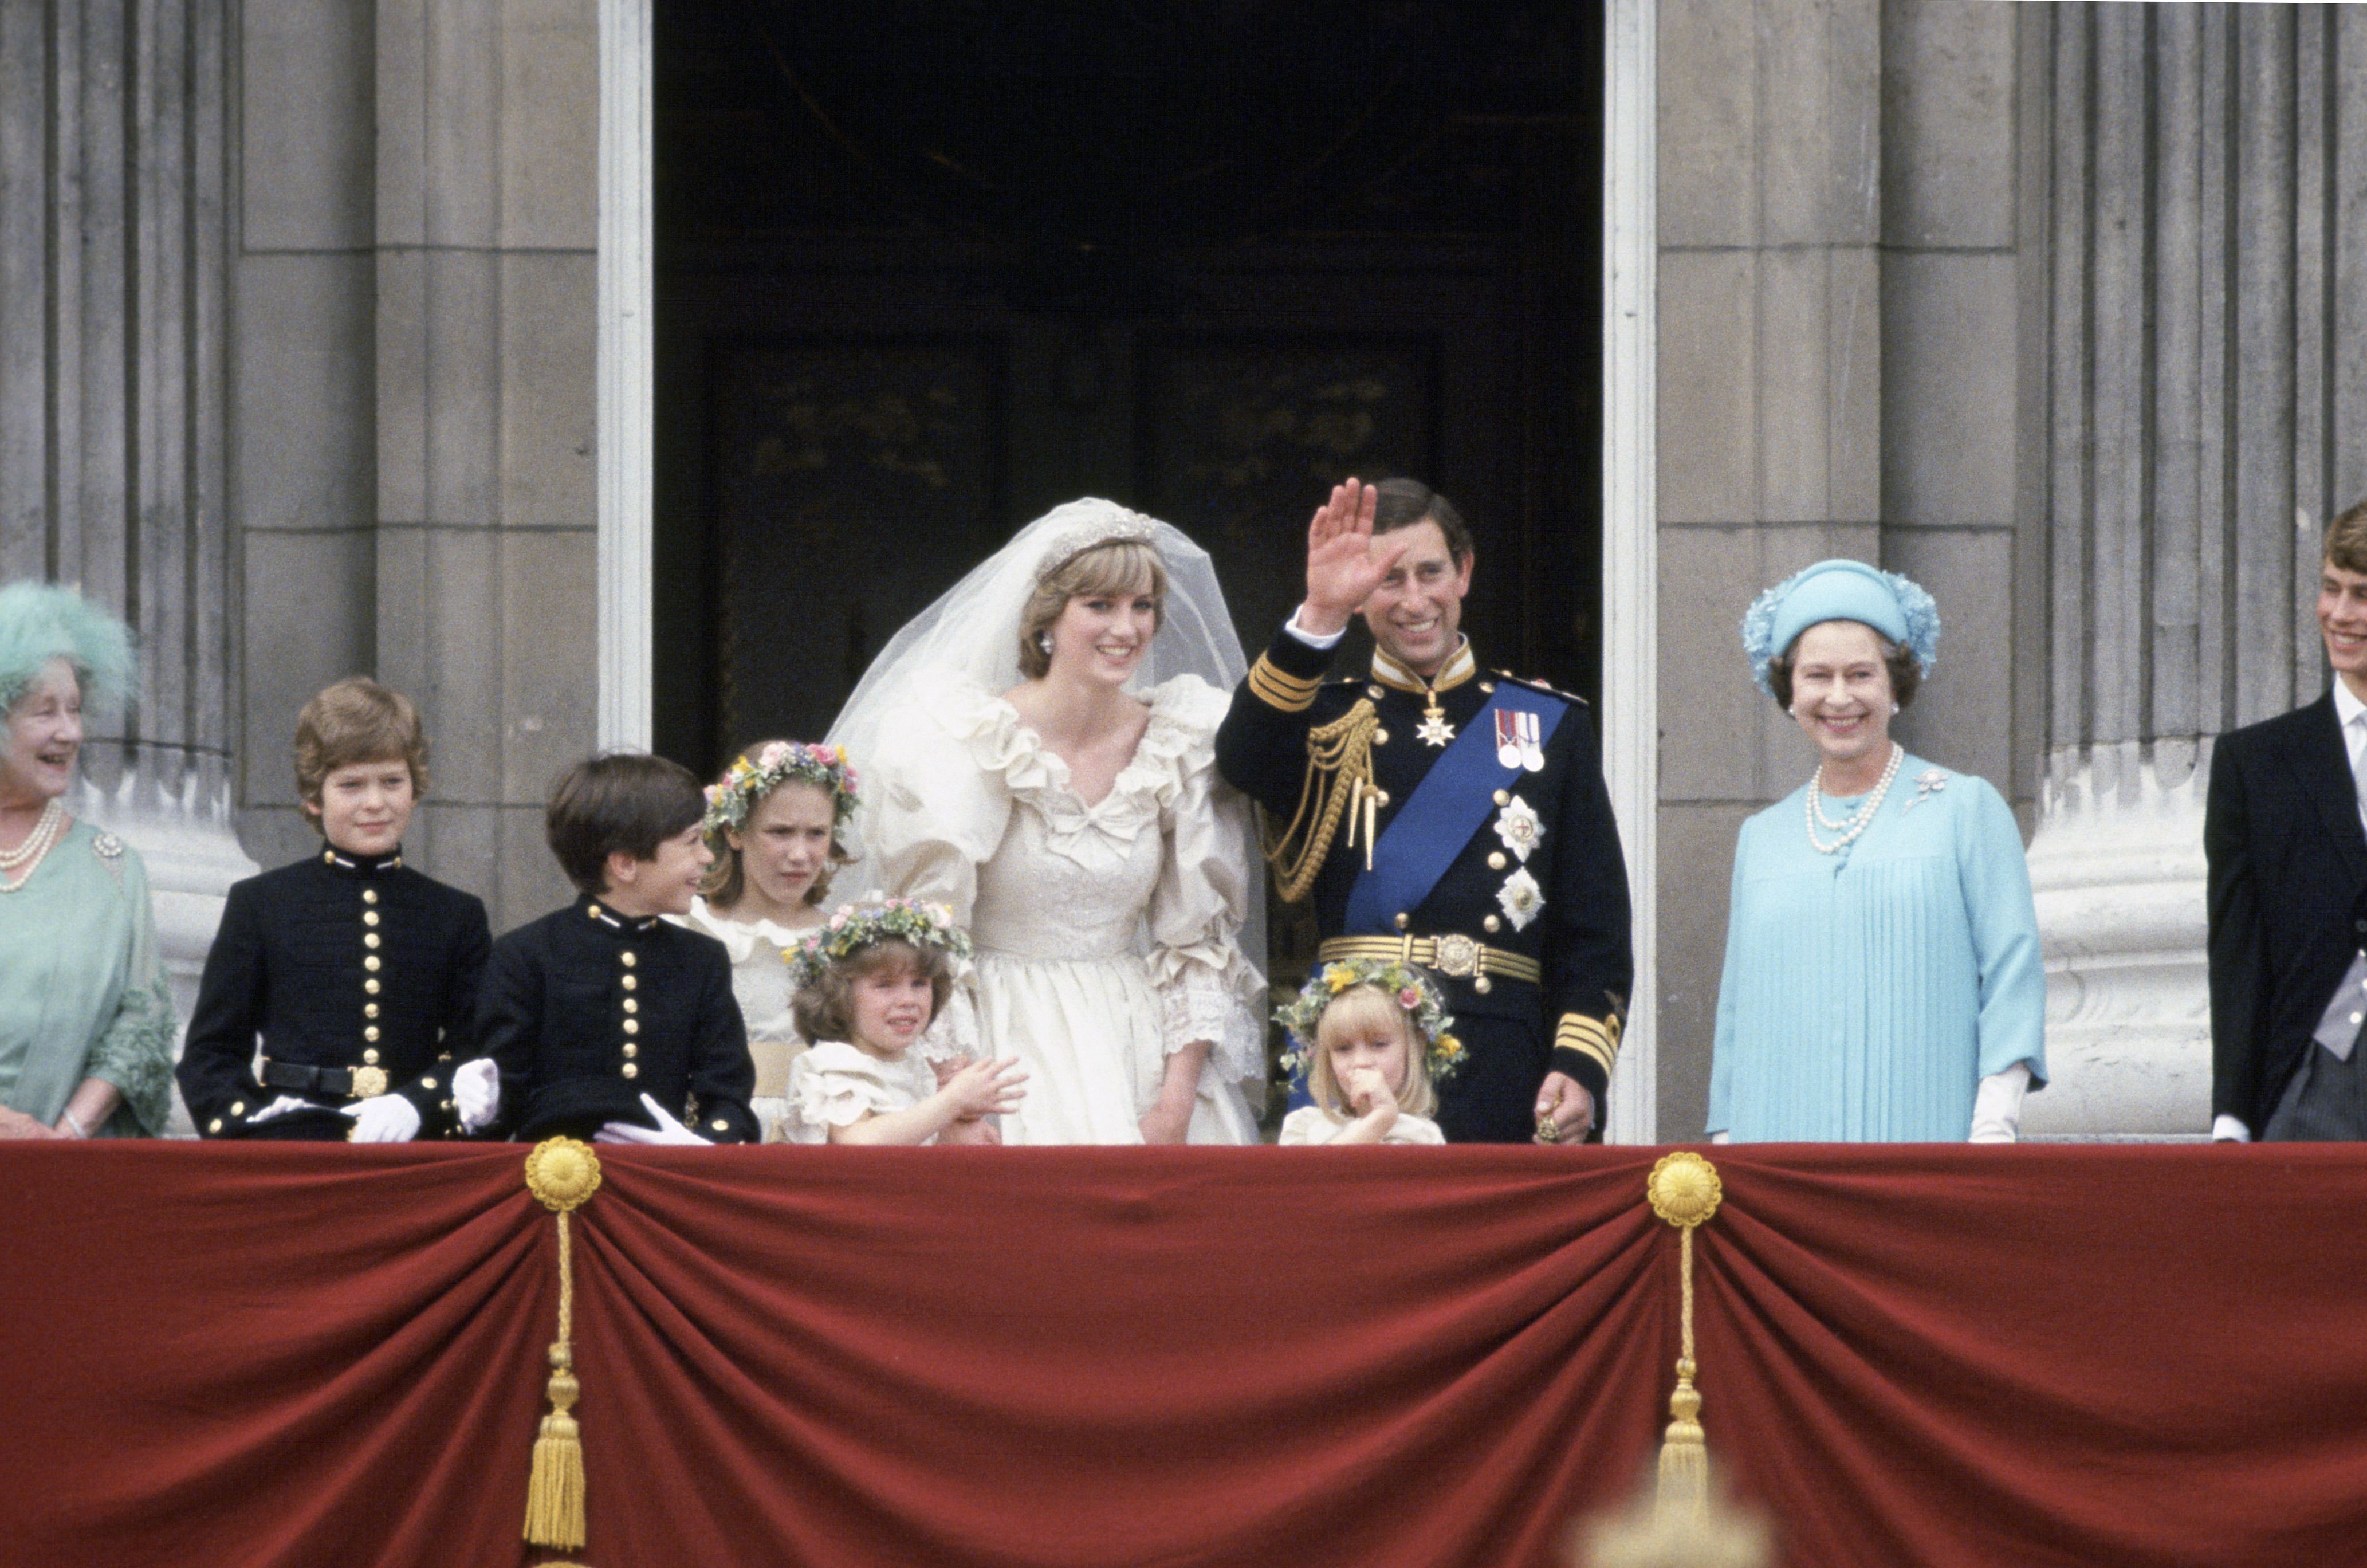 Prince Charles And Princess Diana On Their Wedding Day On The Balcony Of Buckingham Palace.